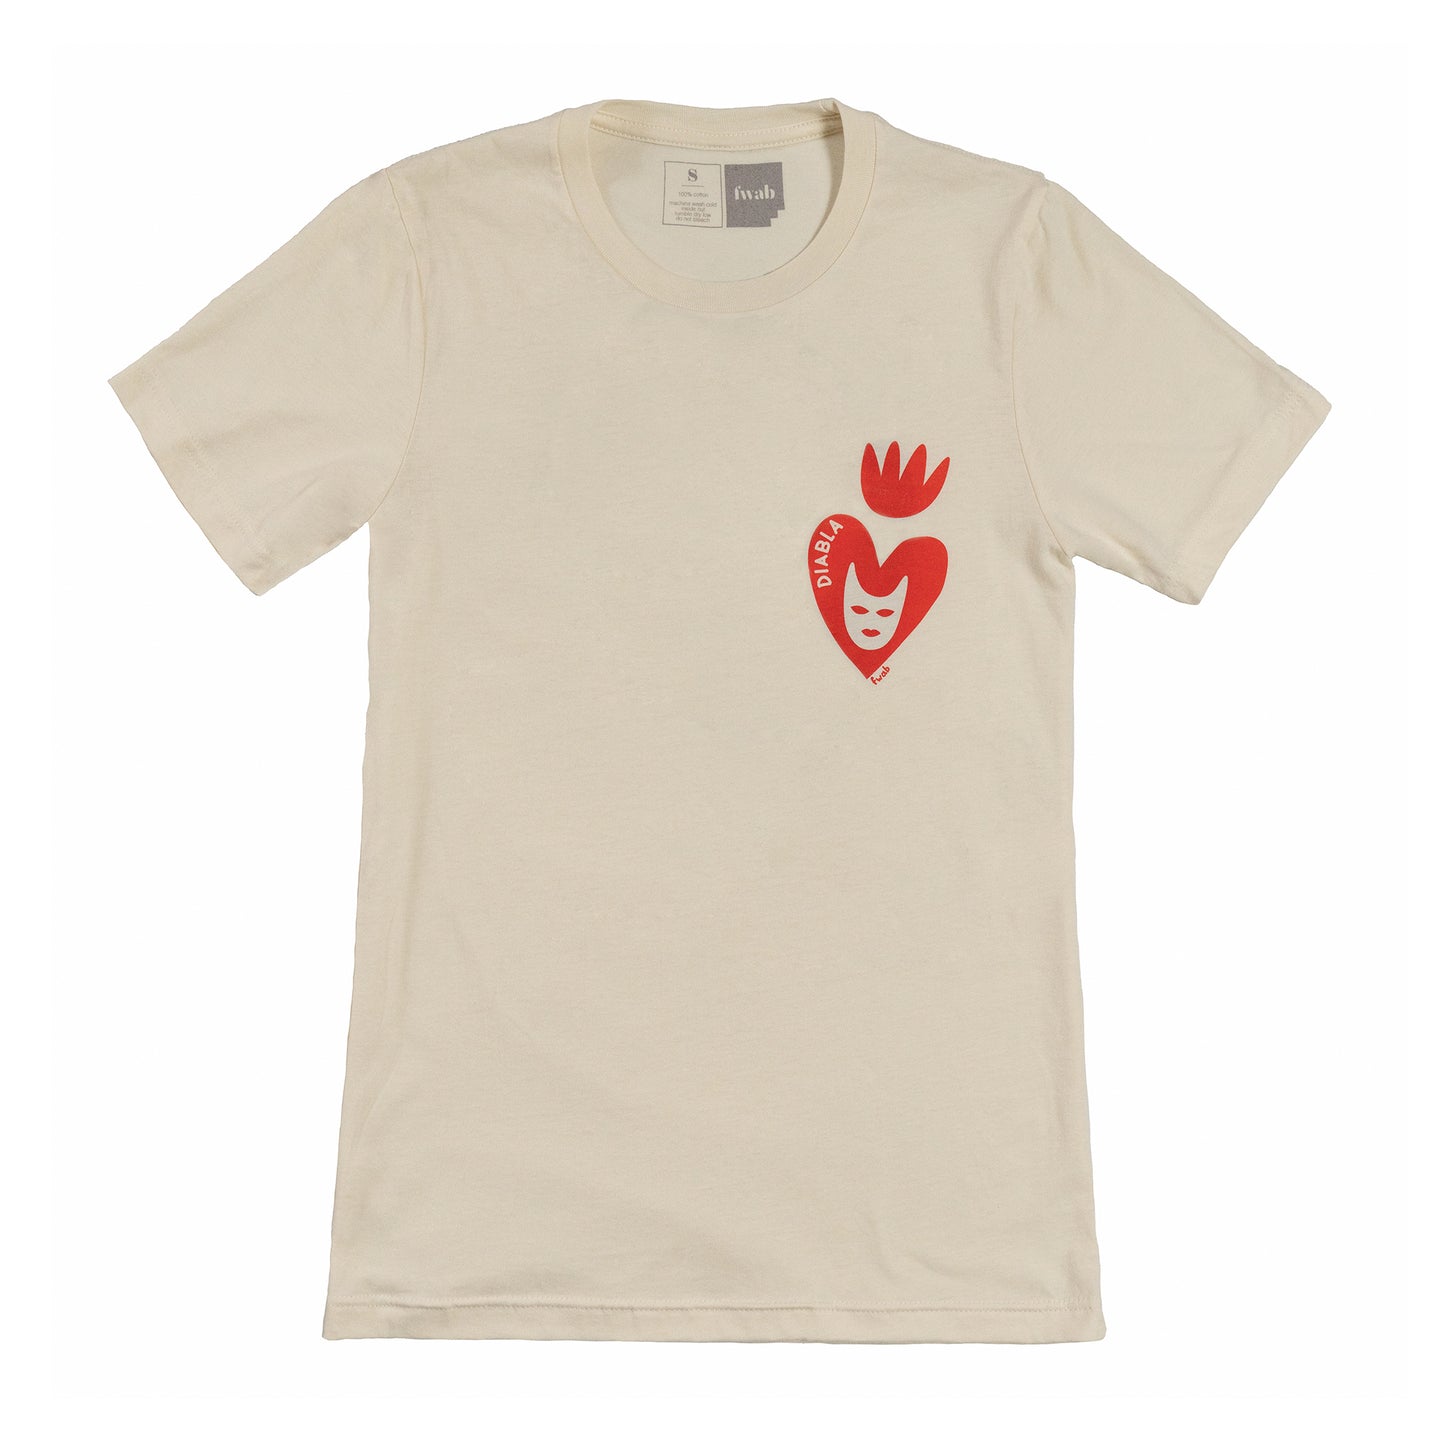 Image of front side of t-shirt. design printed is a red heart with a fire crown above. Inside of heart is the face of a devil and the word "diabla". under heart in small text "fwab"